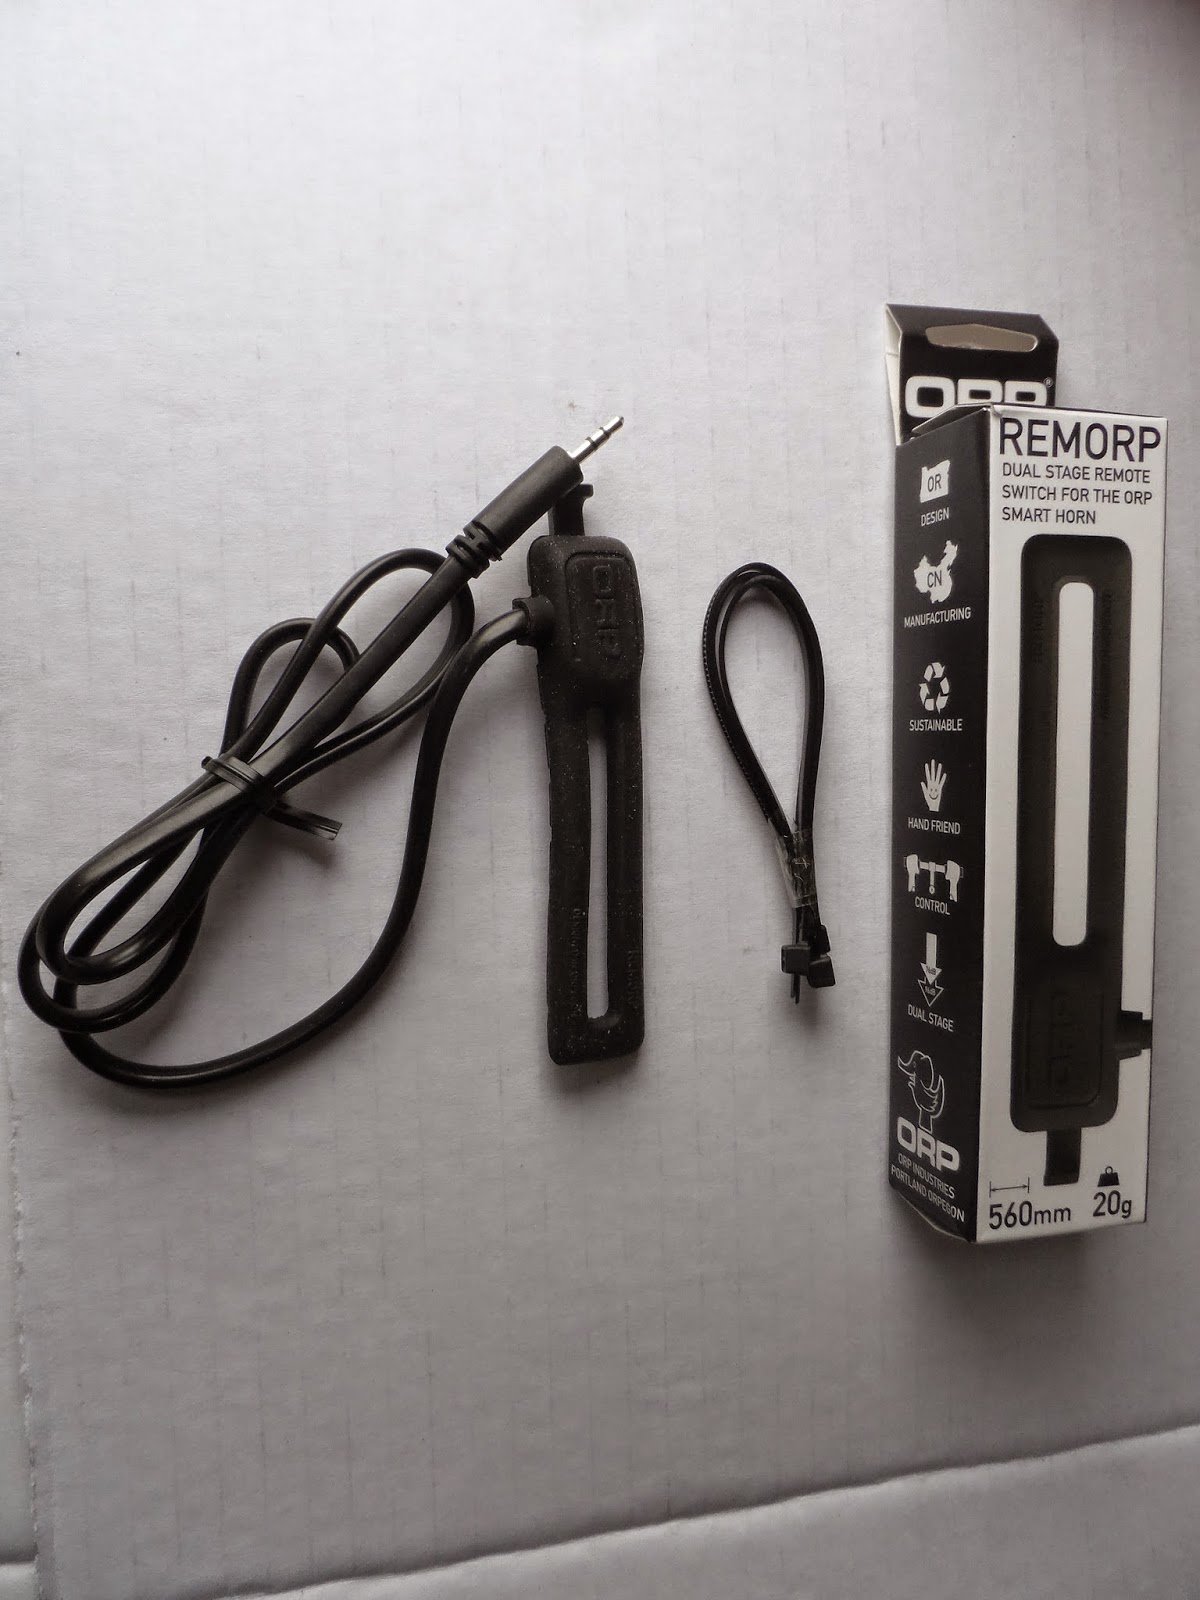 ORP Remorp Dual Stage Remote Switch for the ORP Smart Horn 